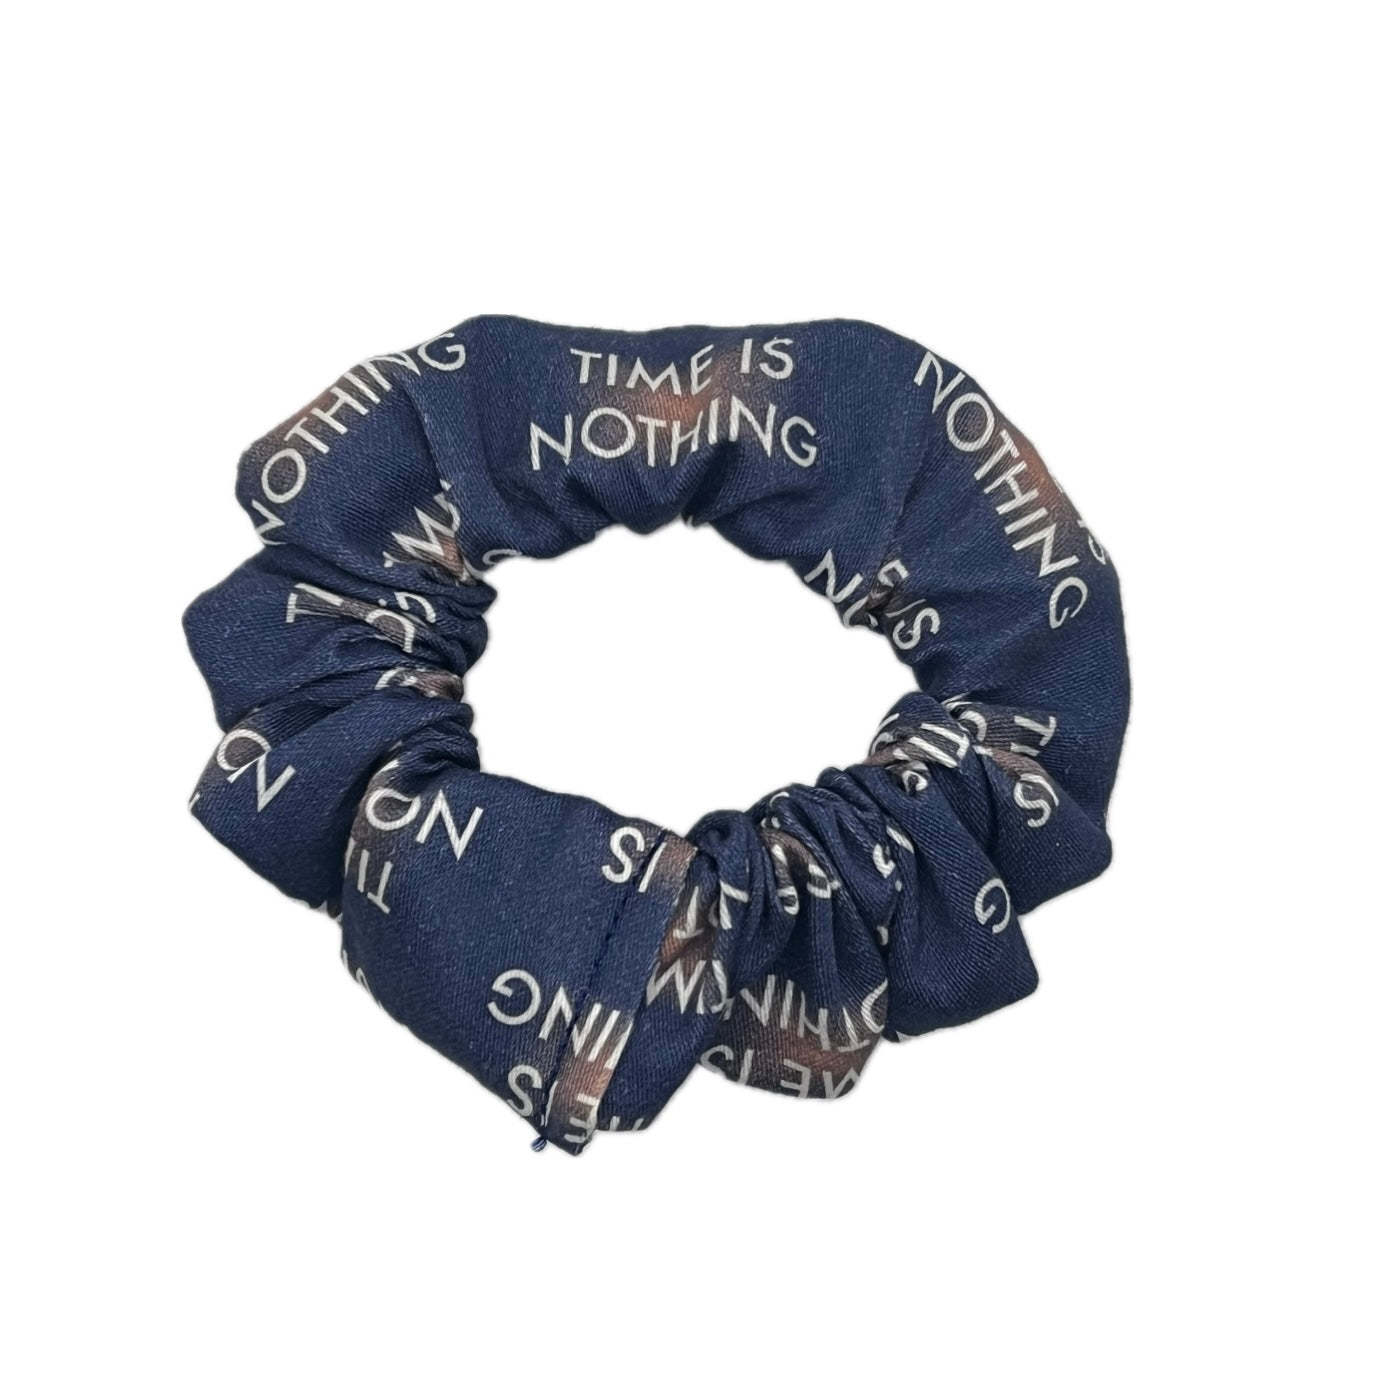 Time is Nothing Scrunchie - Inspired by The Time Traveller's Wife